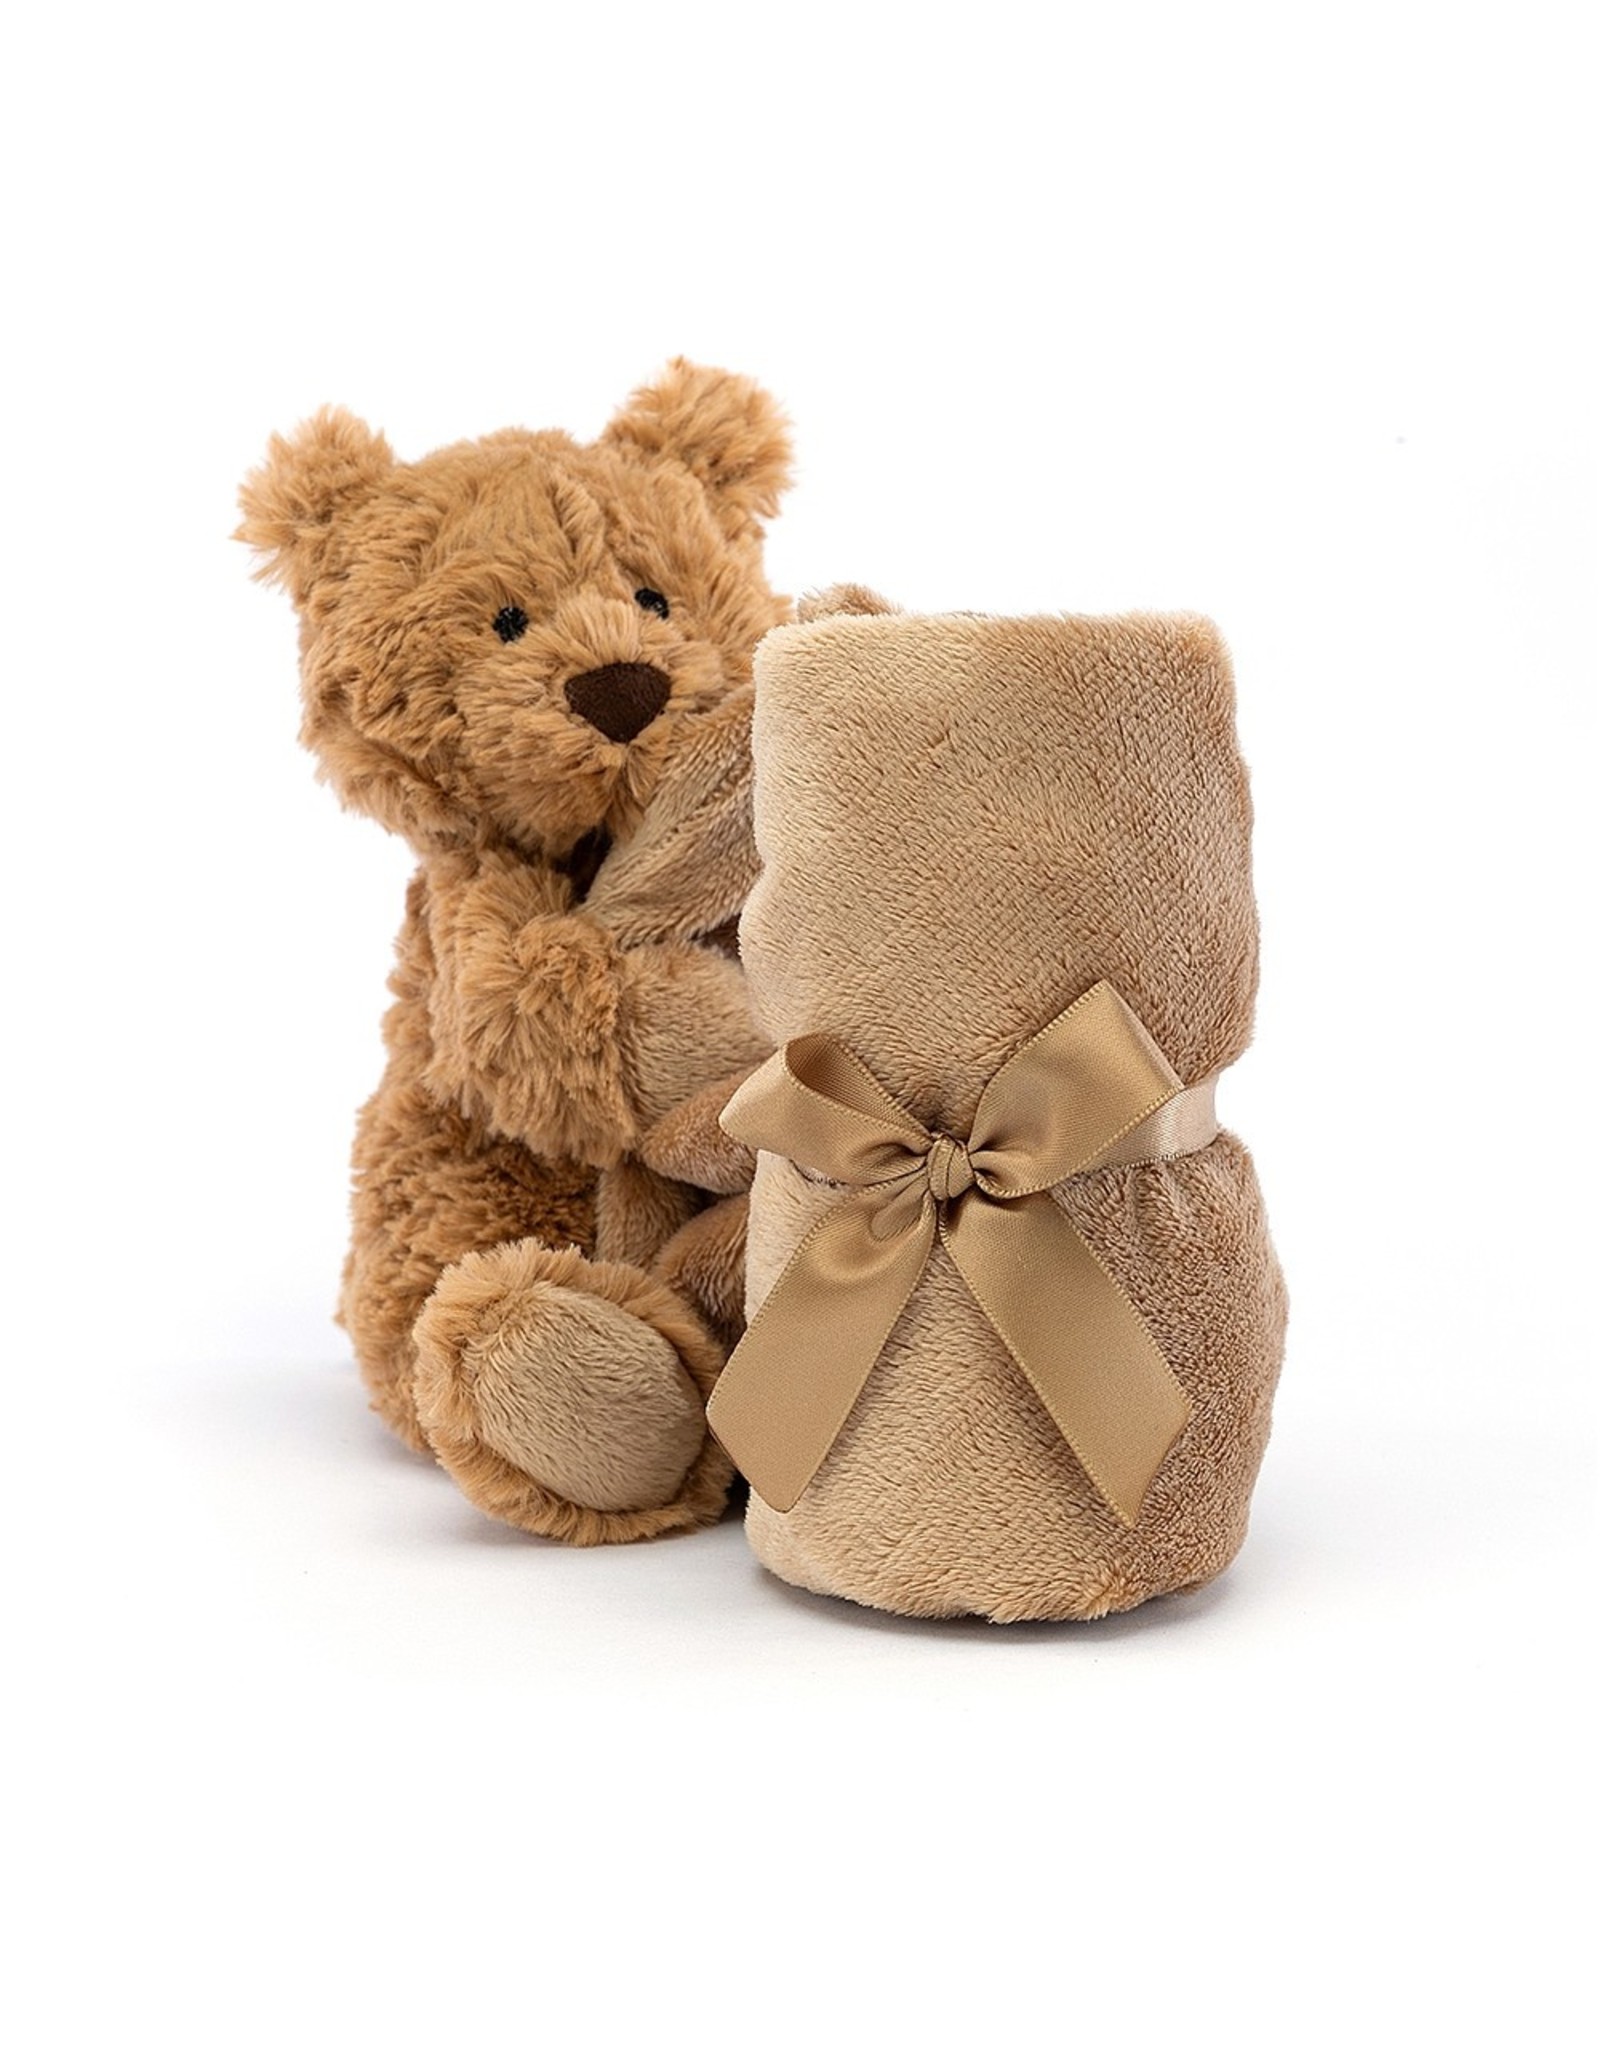 Jellycat Bartholomew bear soother